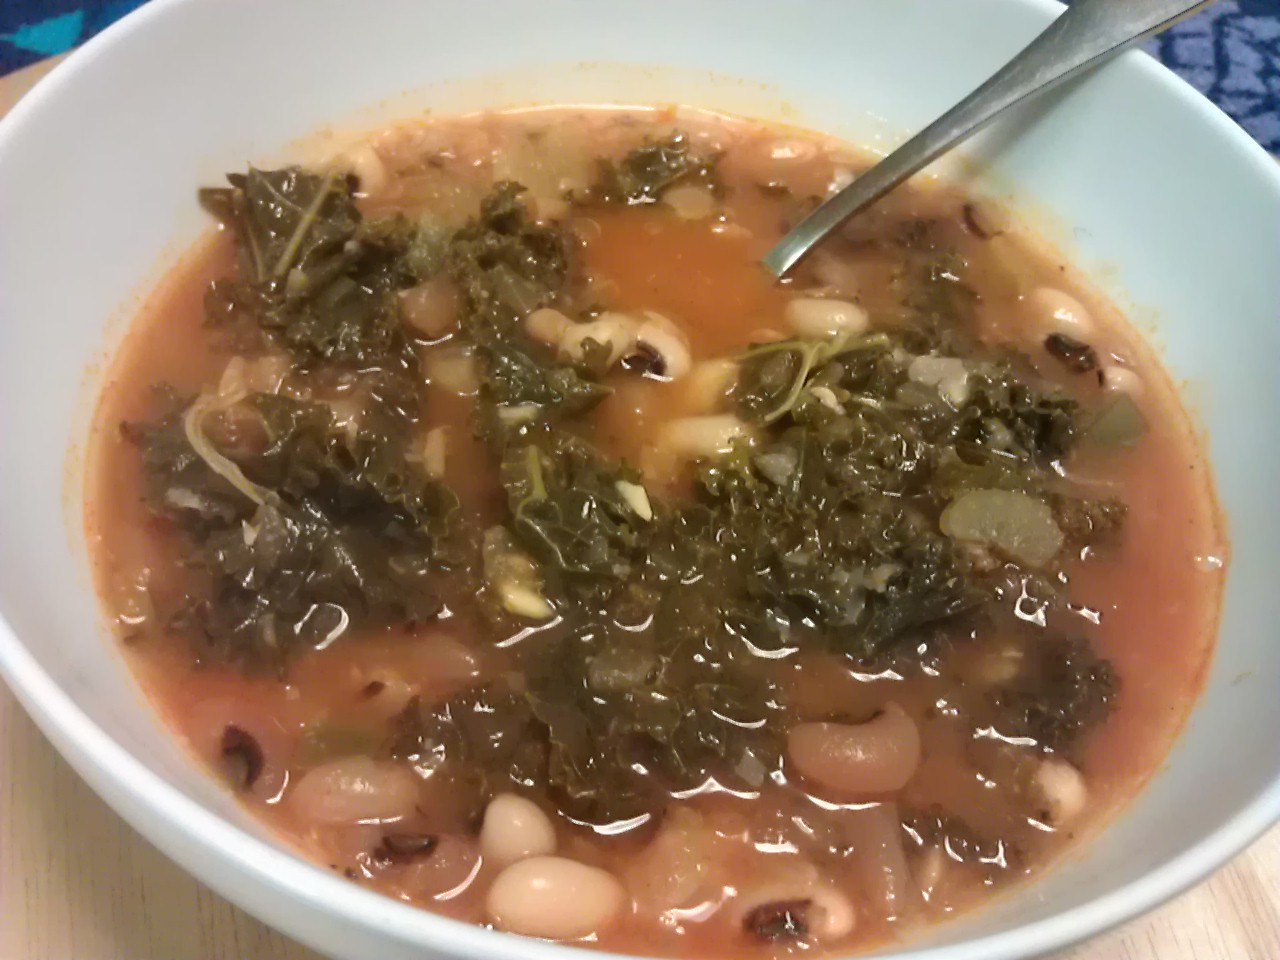 Black eyed pea soup with collards and kale for New Year's day soul food vegan cooking